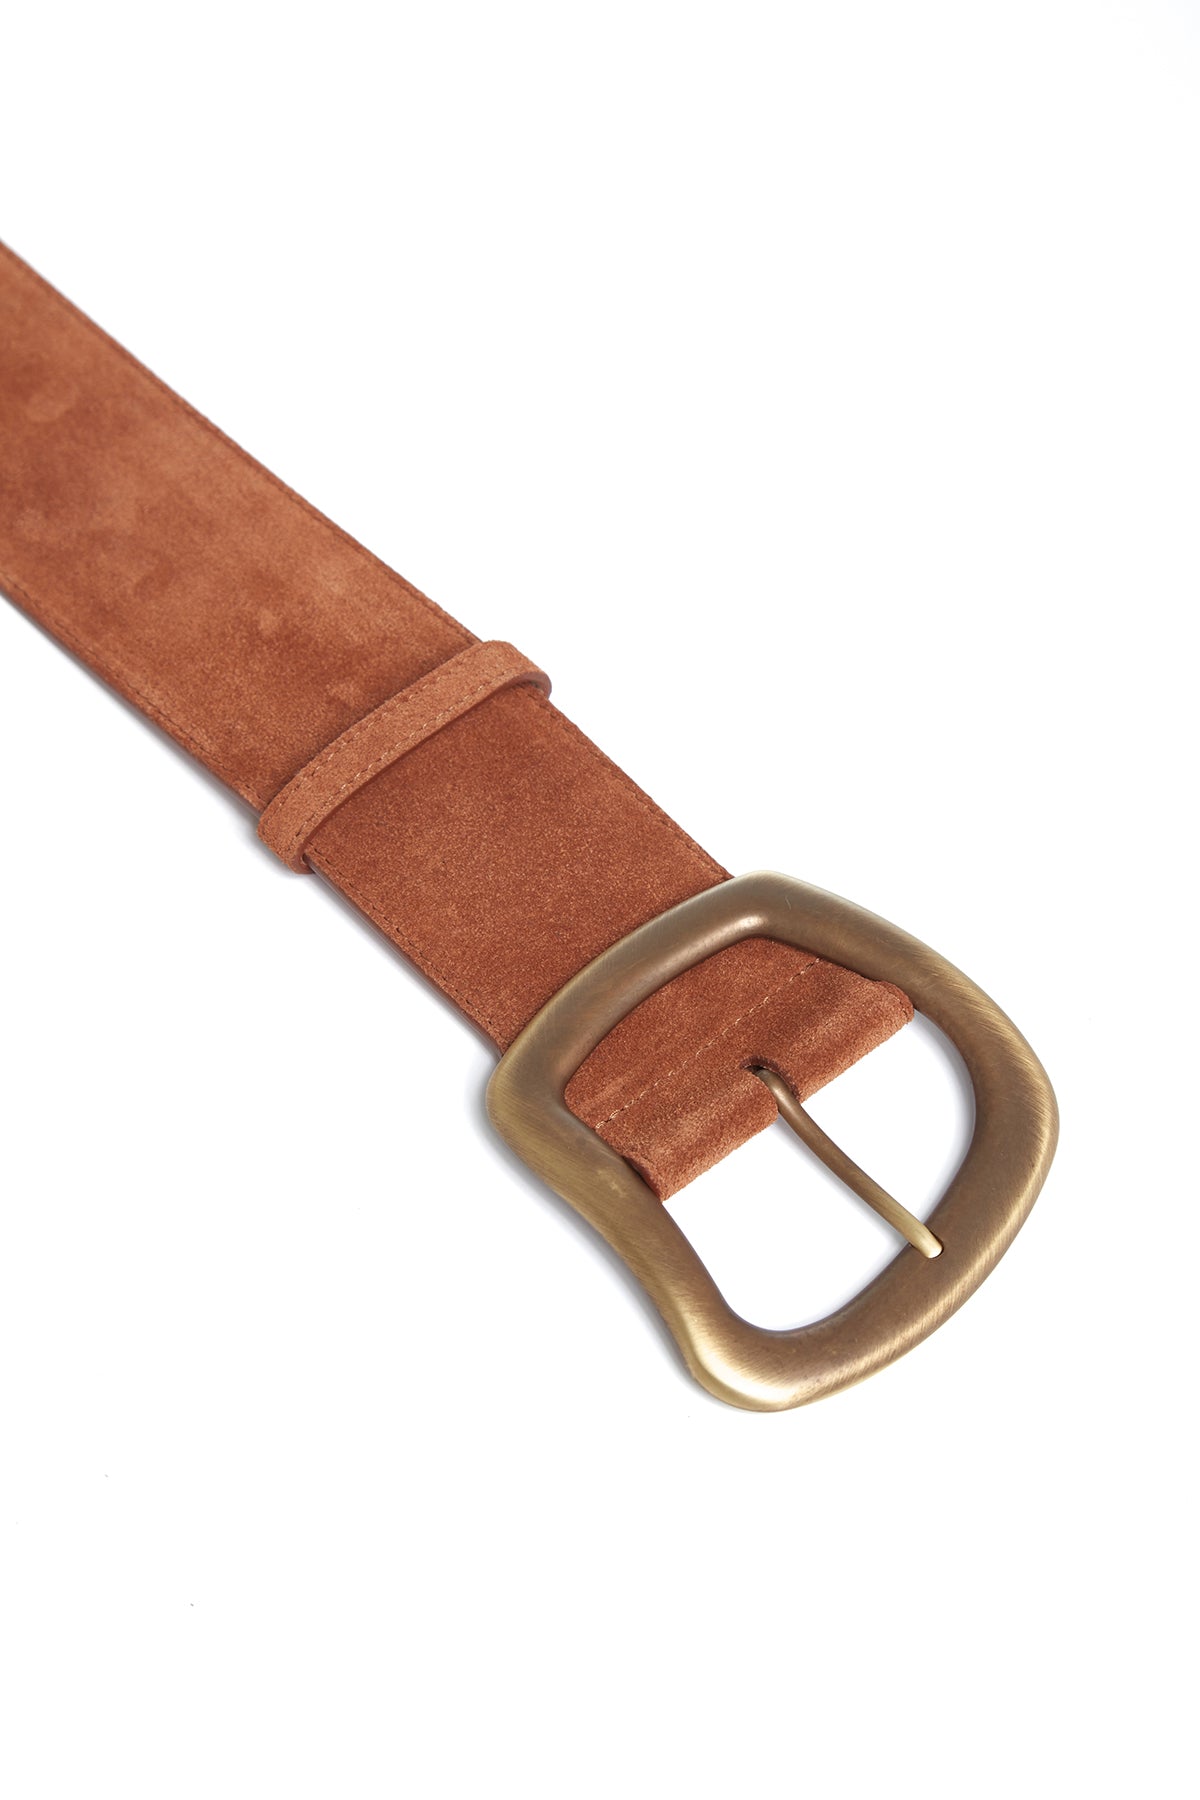 Large Simone Belt in Brown Suede